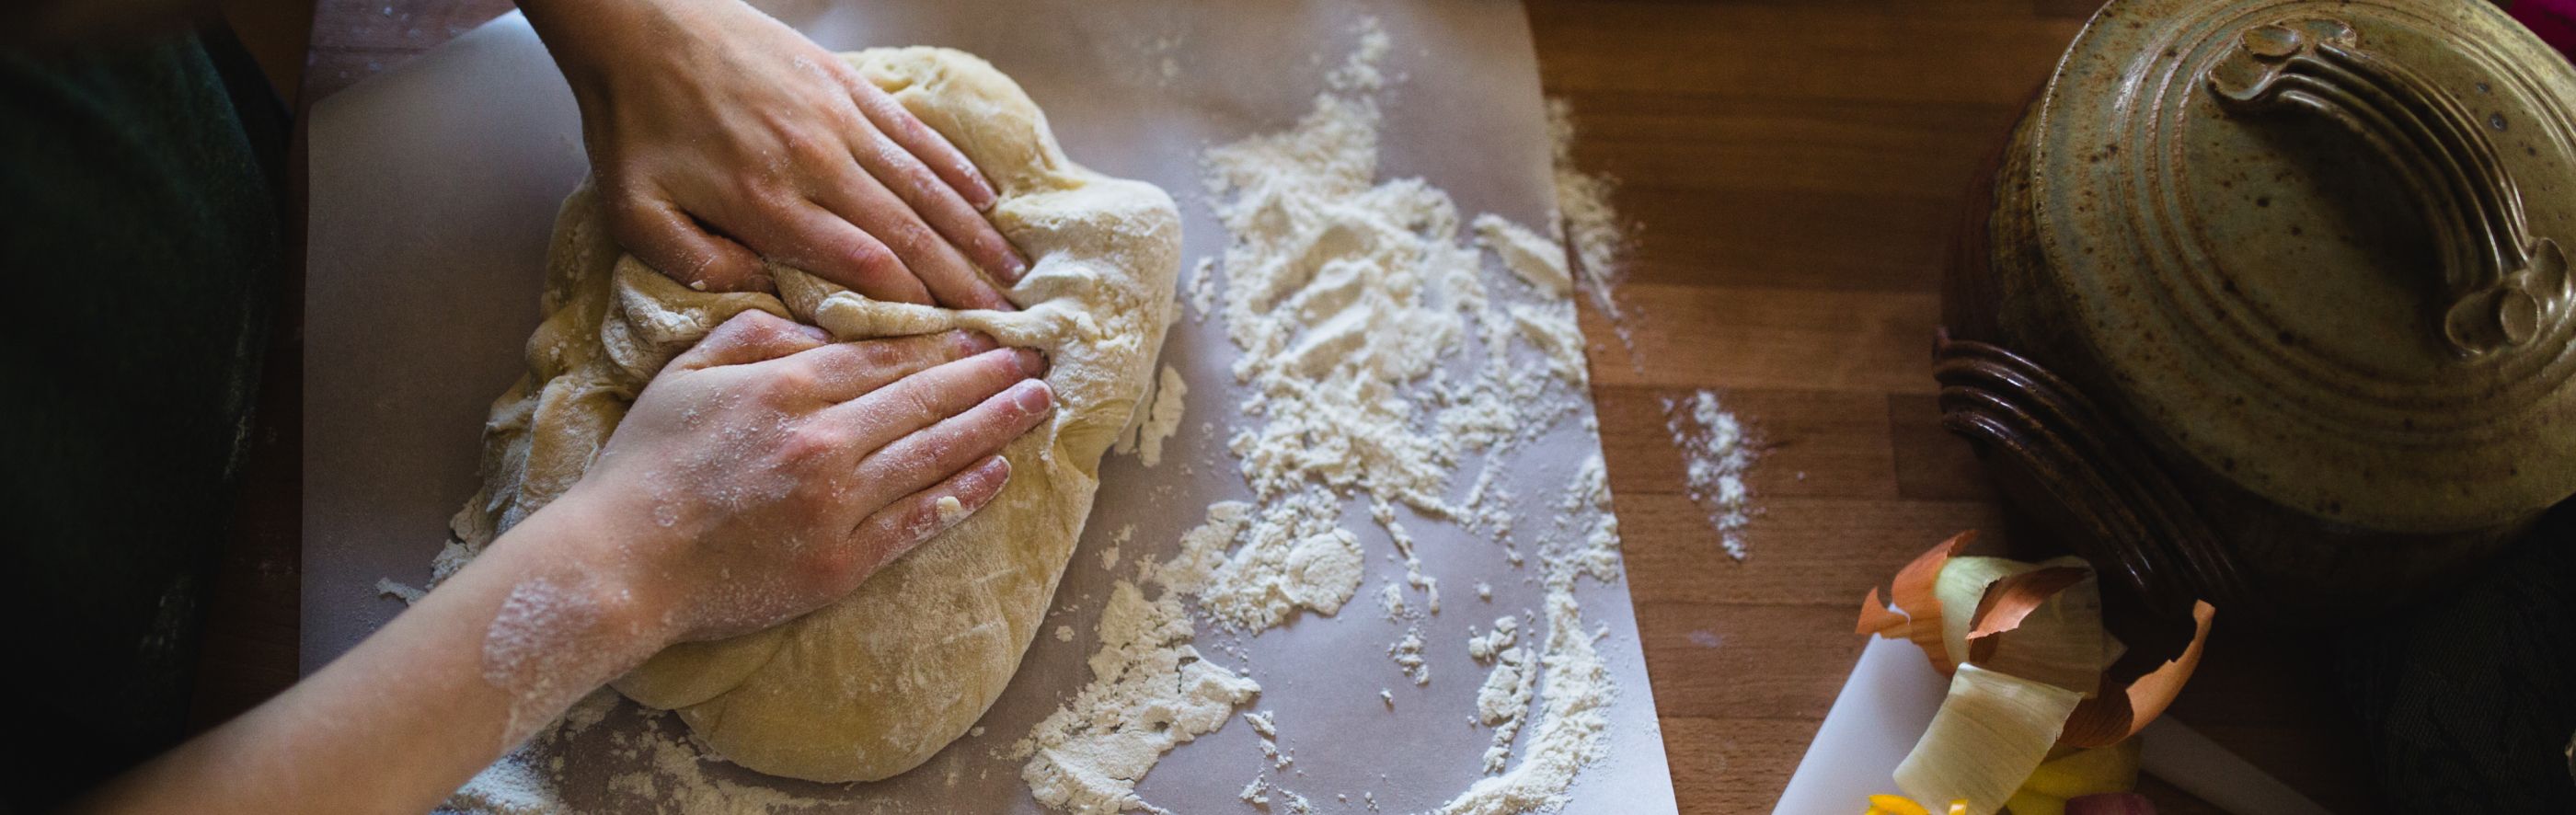 Top view of two hands kneading dough on countertop